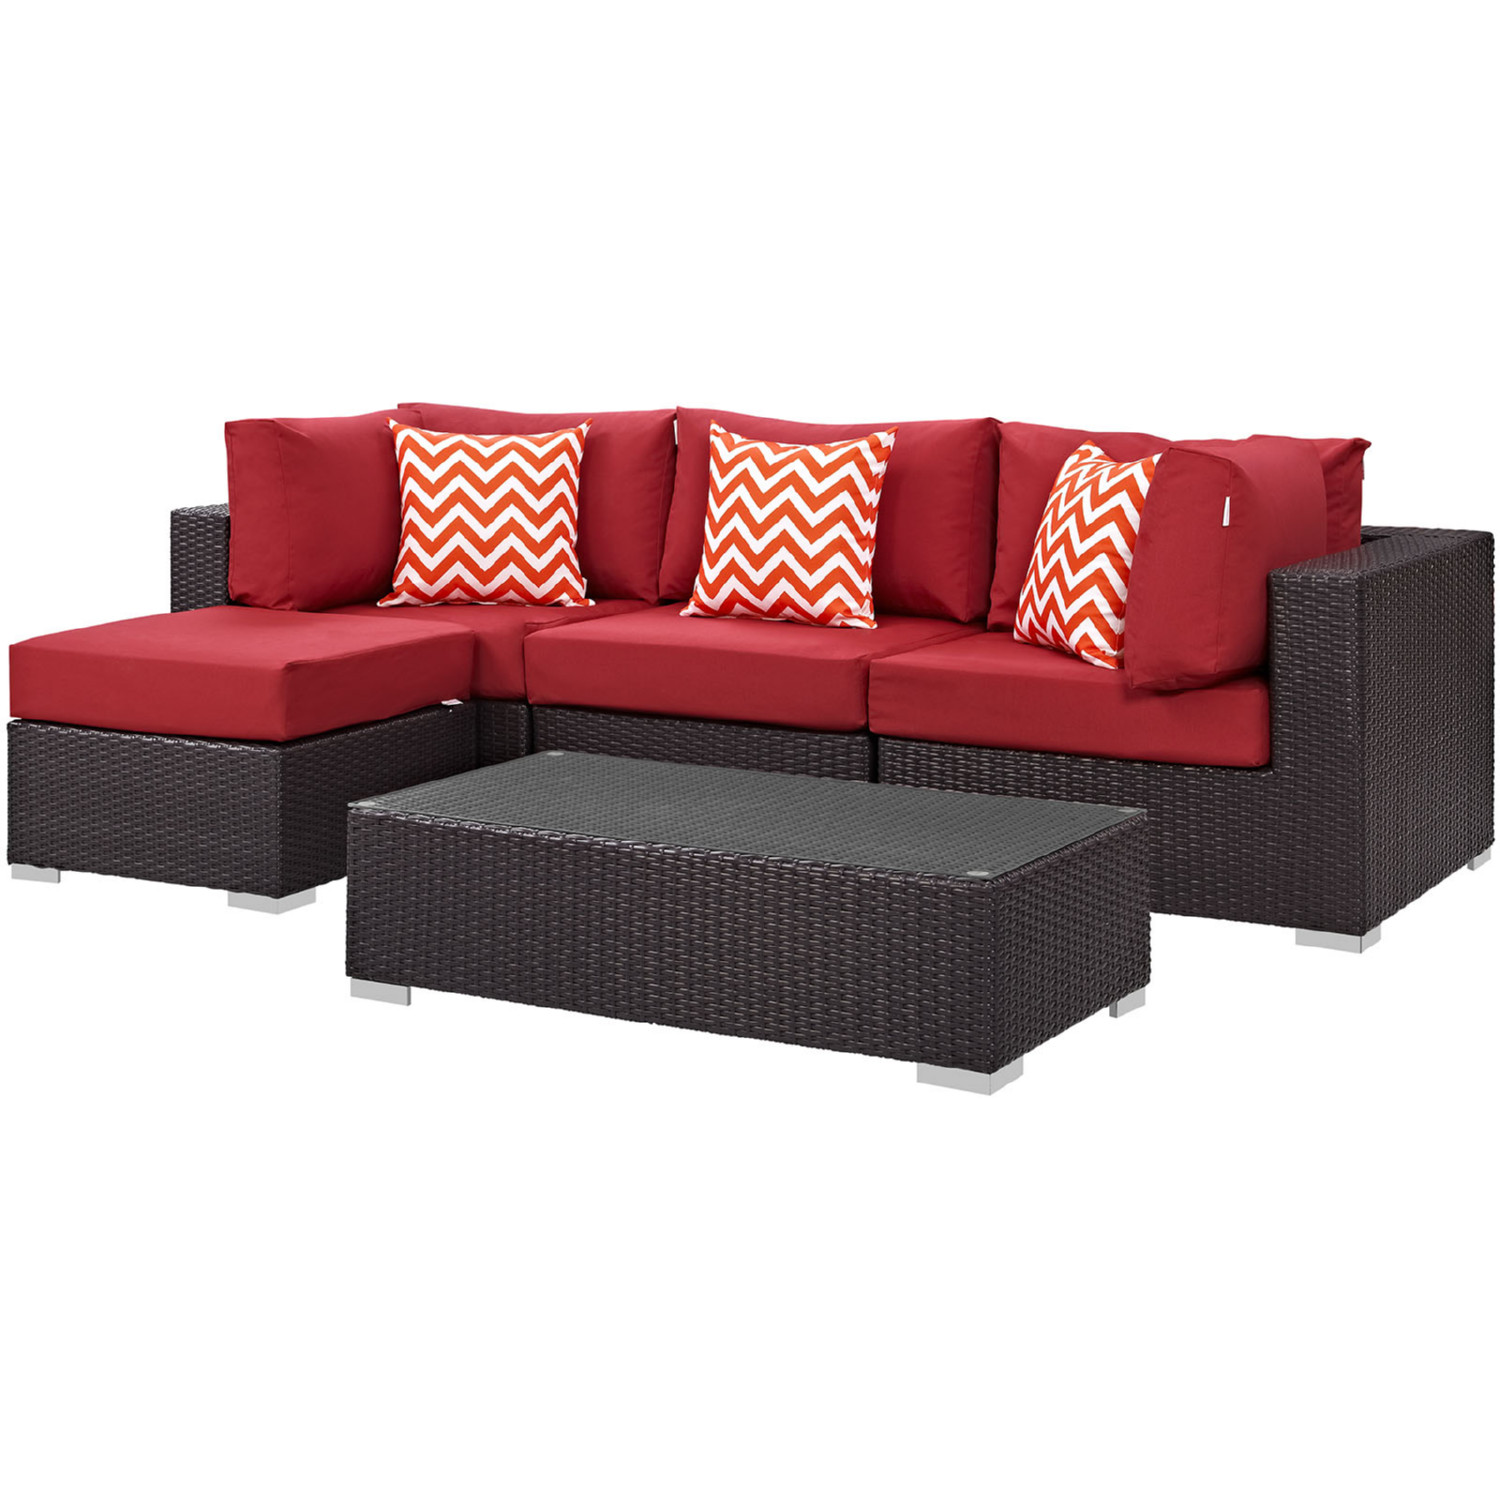 Modway Convene Wicker Rattan 5-Piece Outdoor Patio Furniture Set with Cushions in Espresso Red